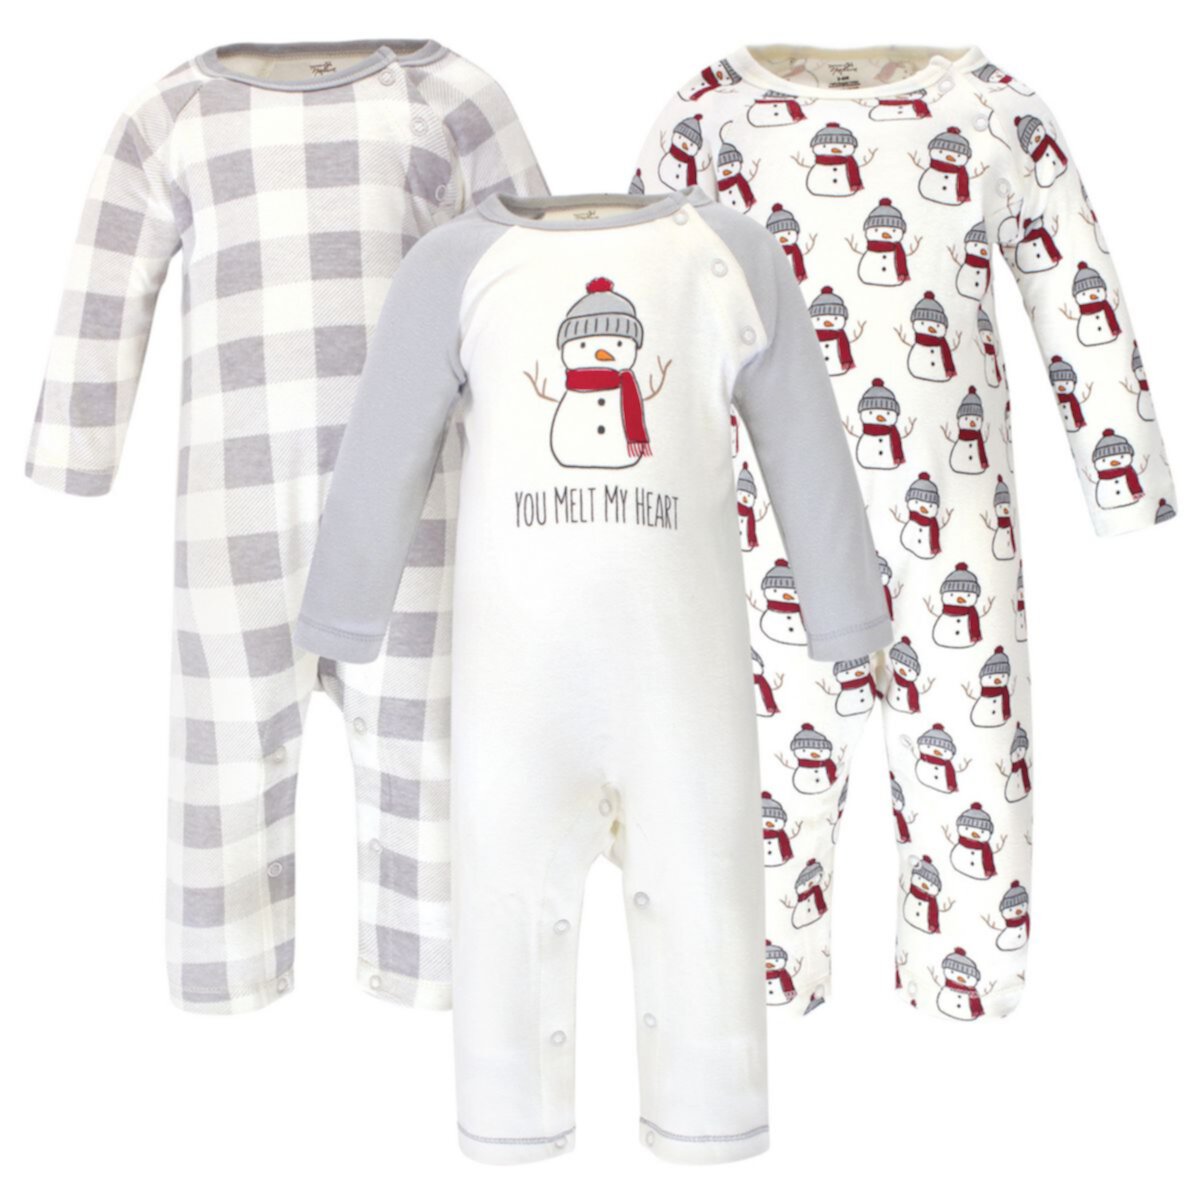 Touched by Nature Baby Organic Cotton Coveralls 3pk, Snowman Touched by Nature